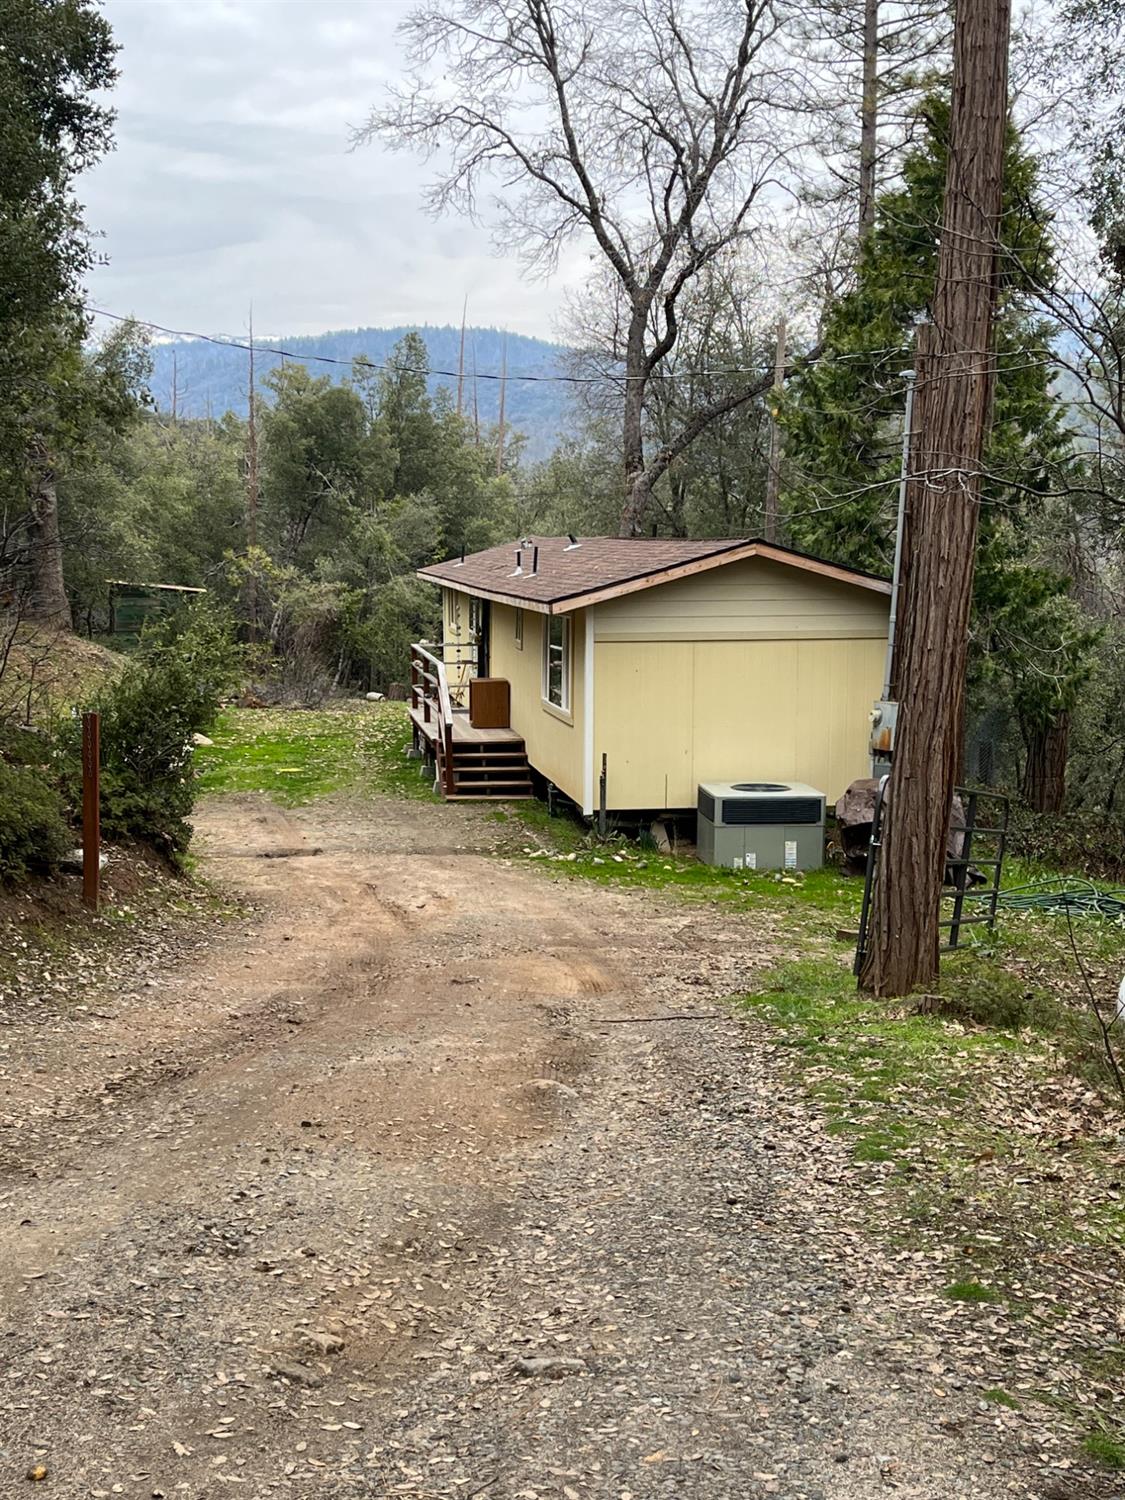 Photo of 35197 Rd 222 in North Fork, CA